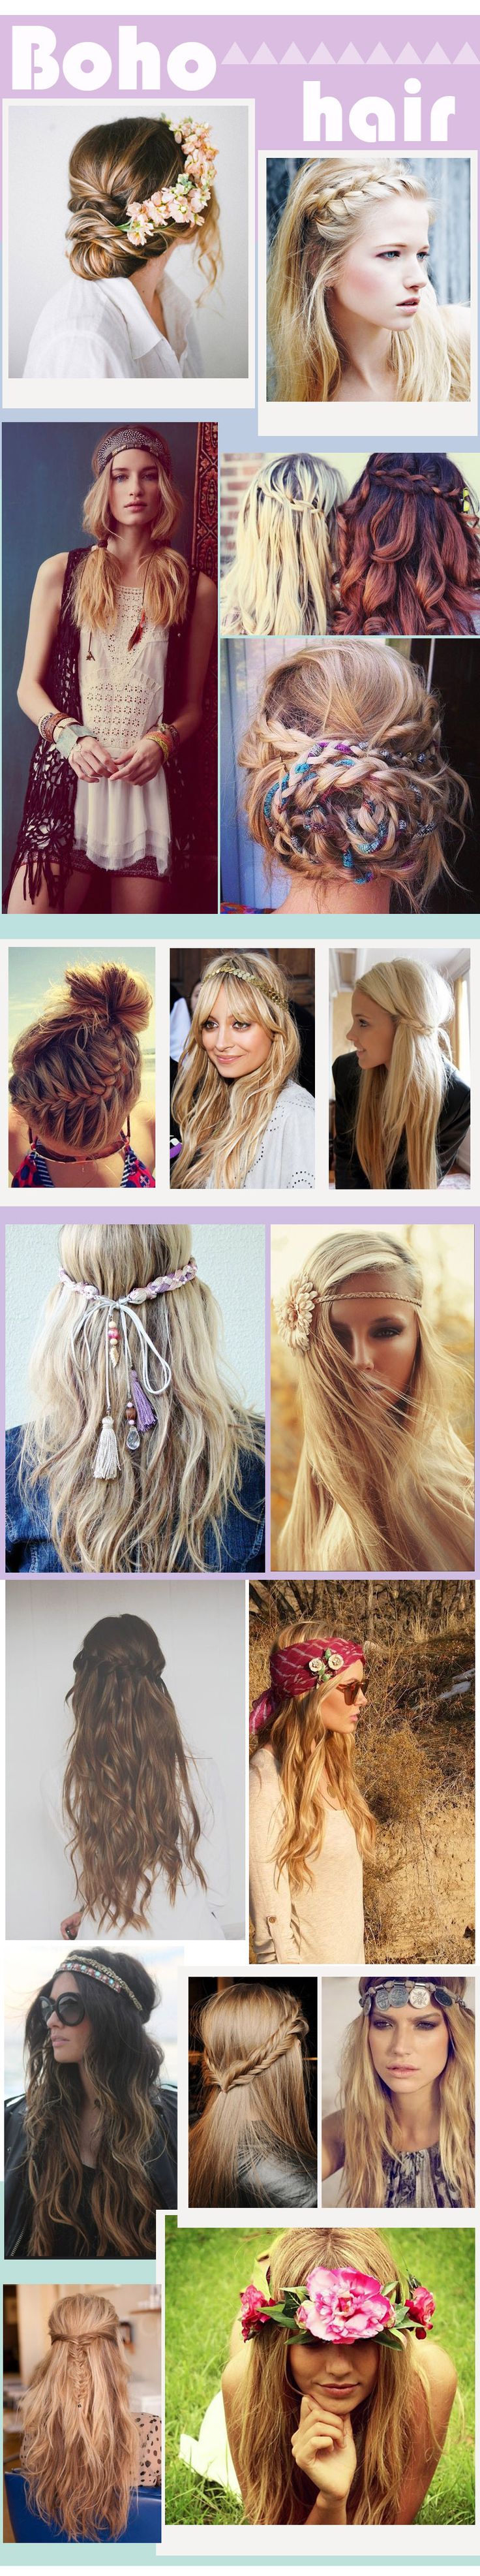 Boho-Chic Hairstyles for Girls